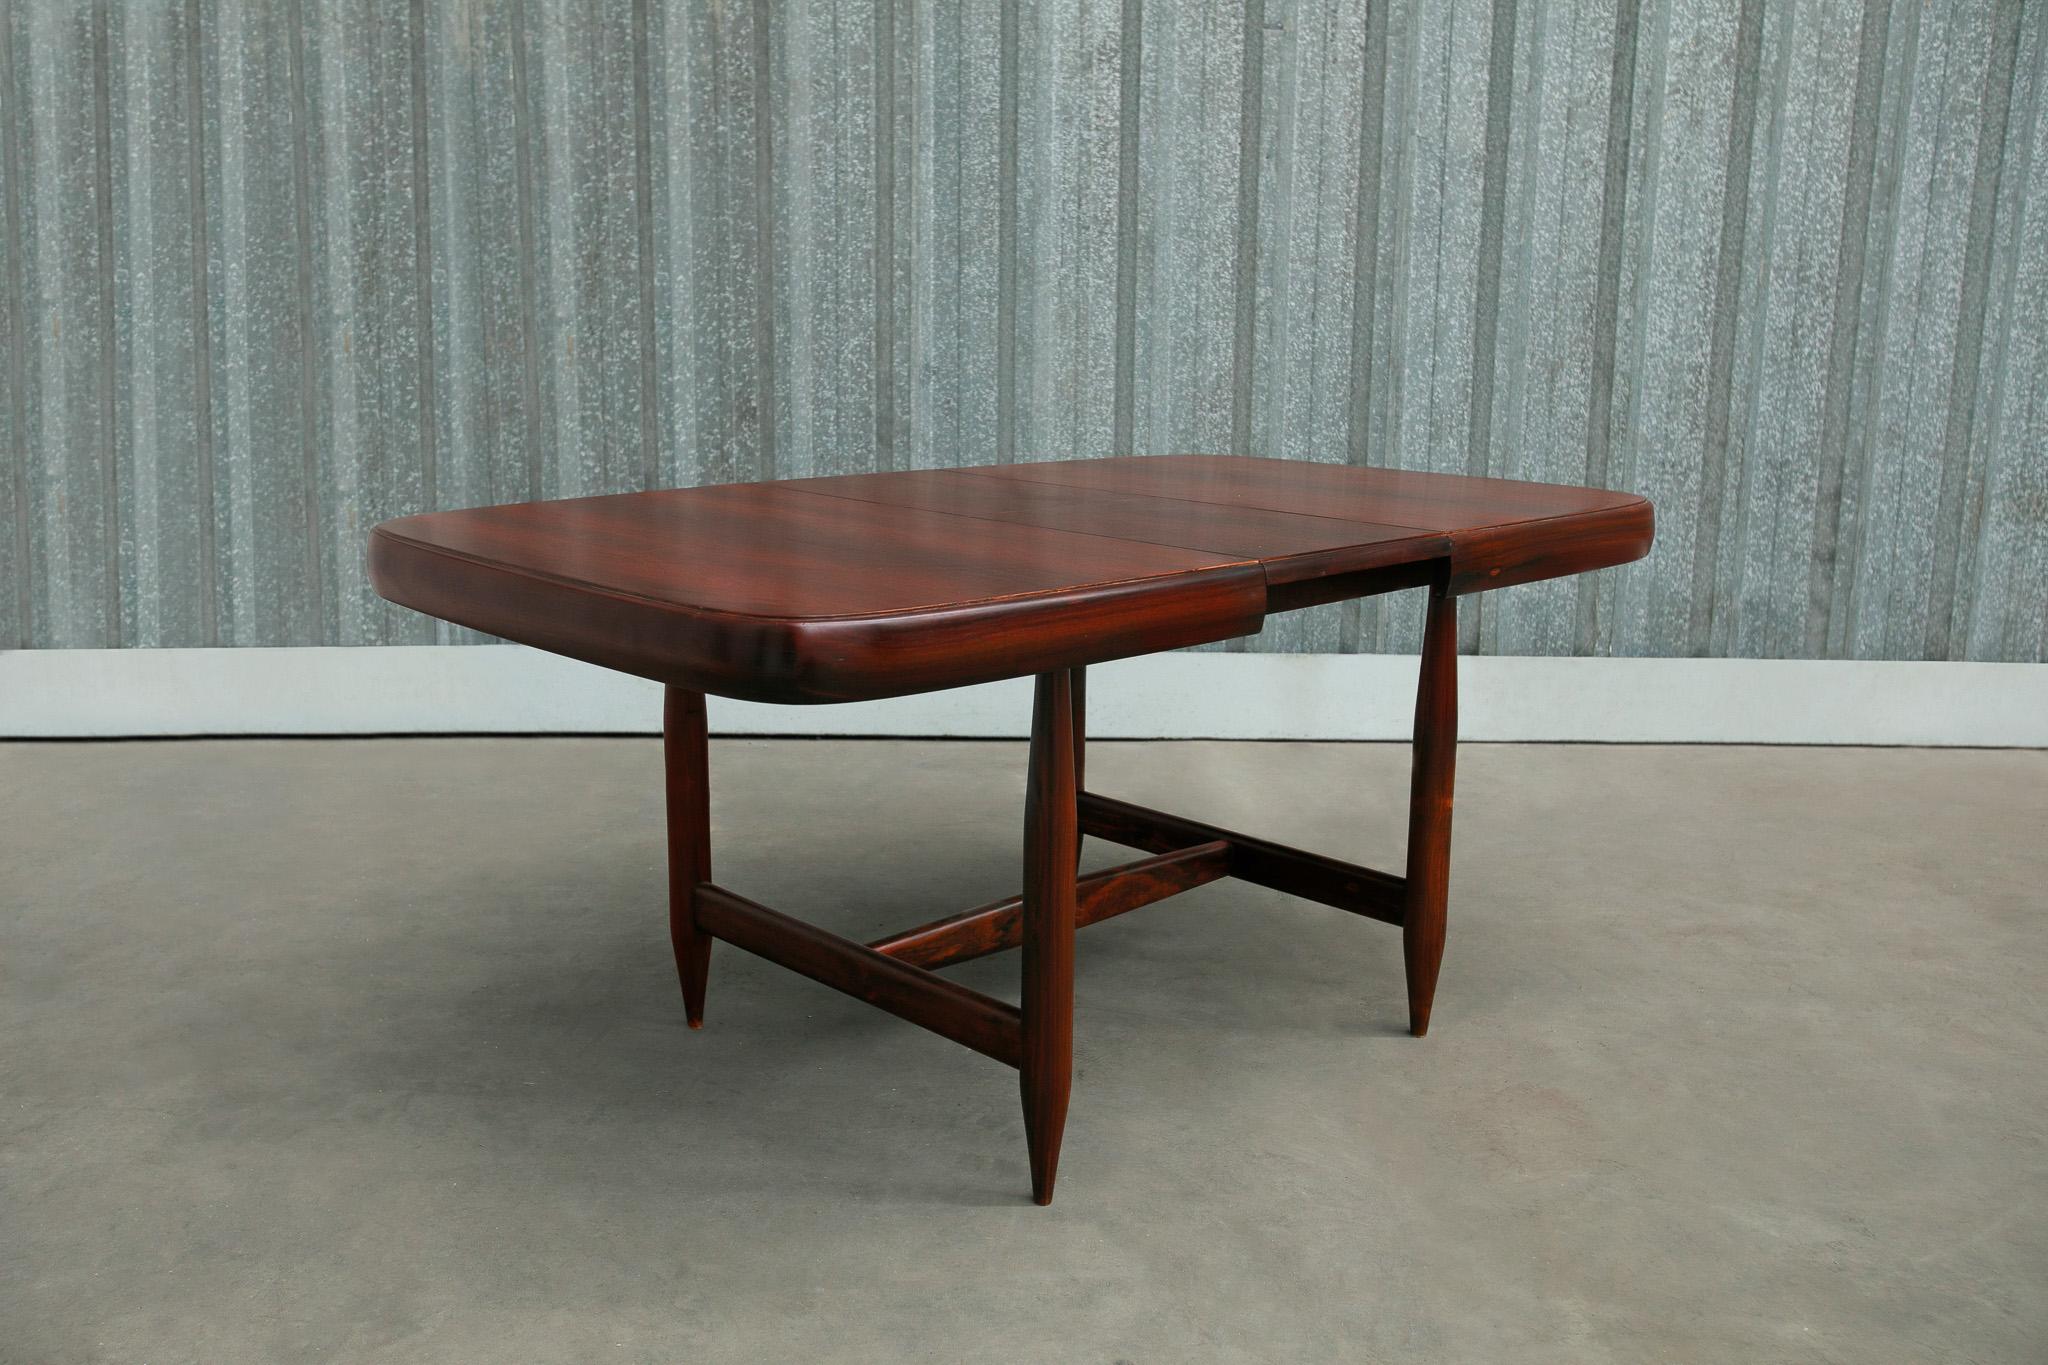 Brazilian Midcentury Expandable Dining Table in Hardwood by Sergio Rodrigues, Brazil